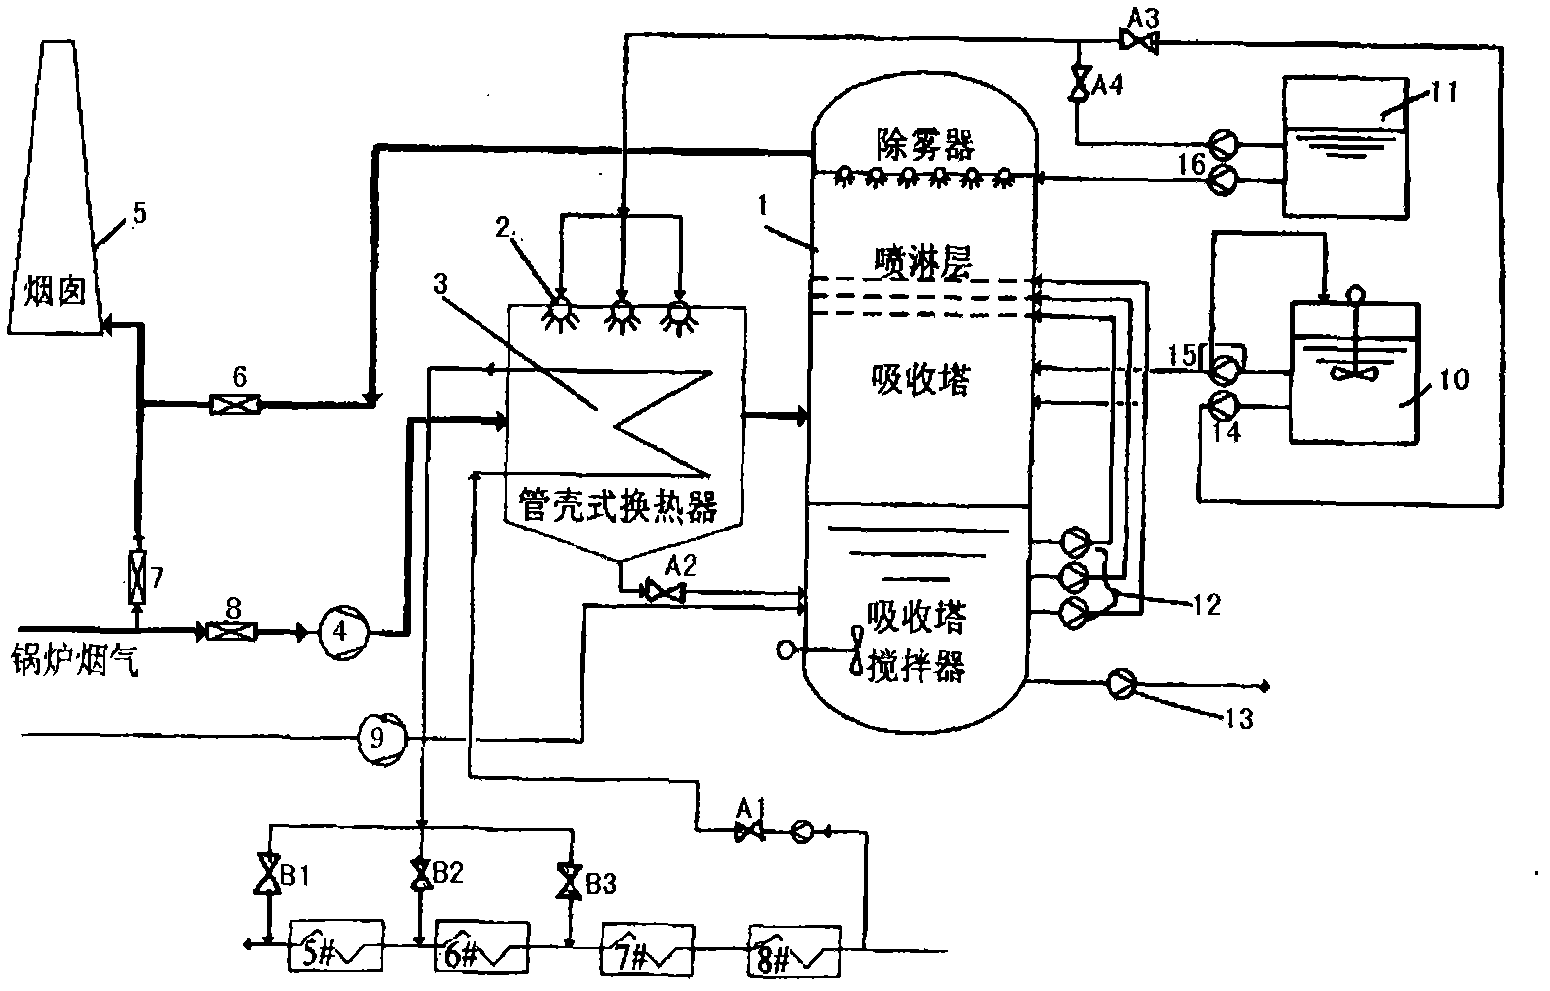 Integrated system for utilizing residual heat of boiler smoke and removing sulfur